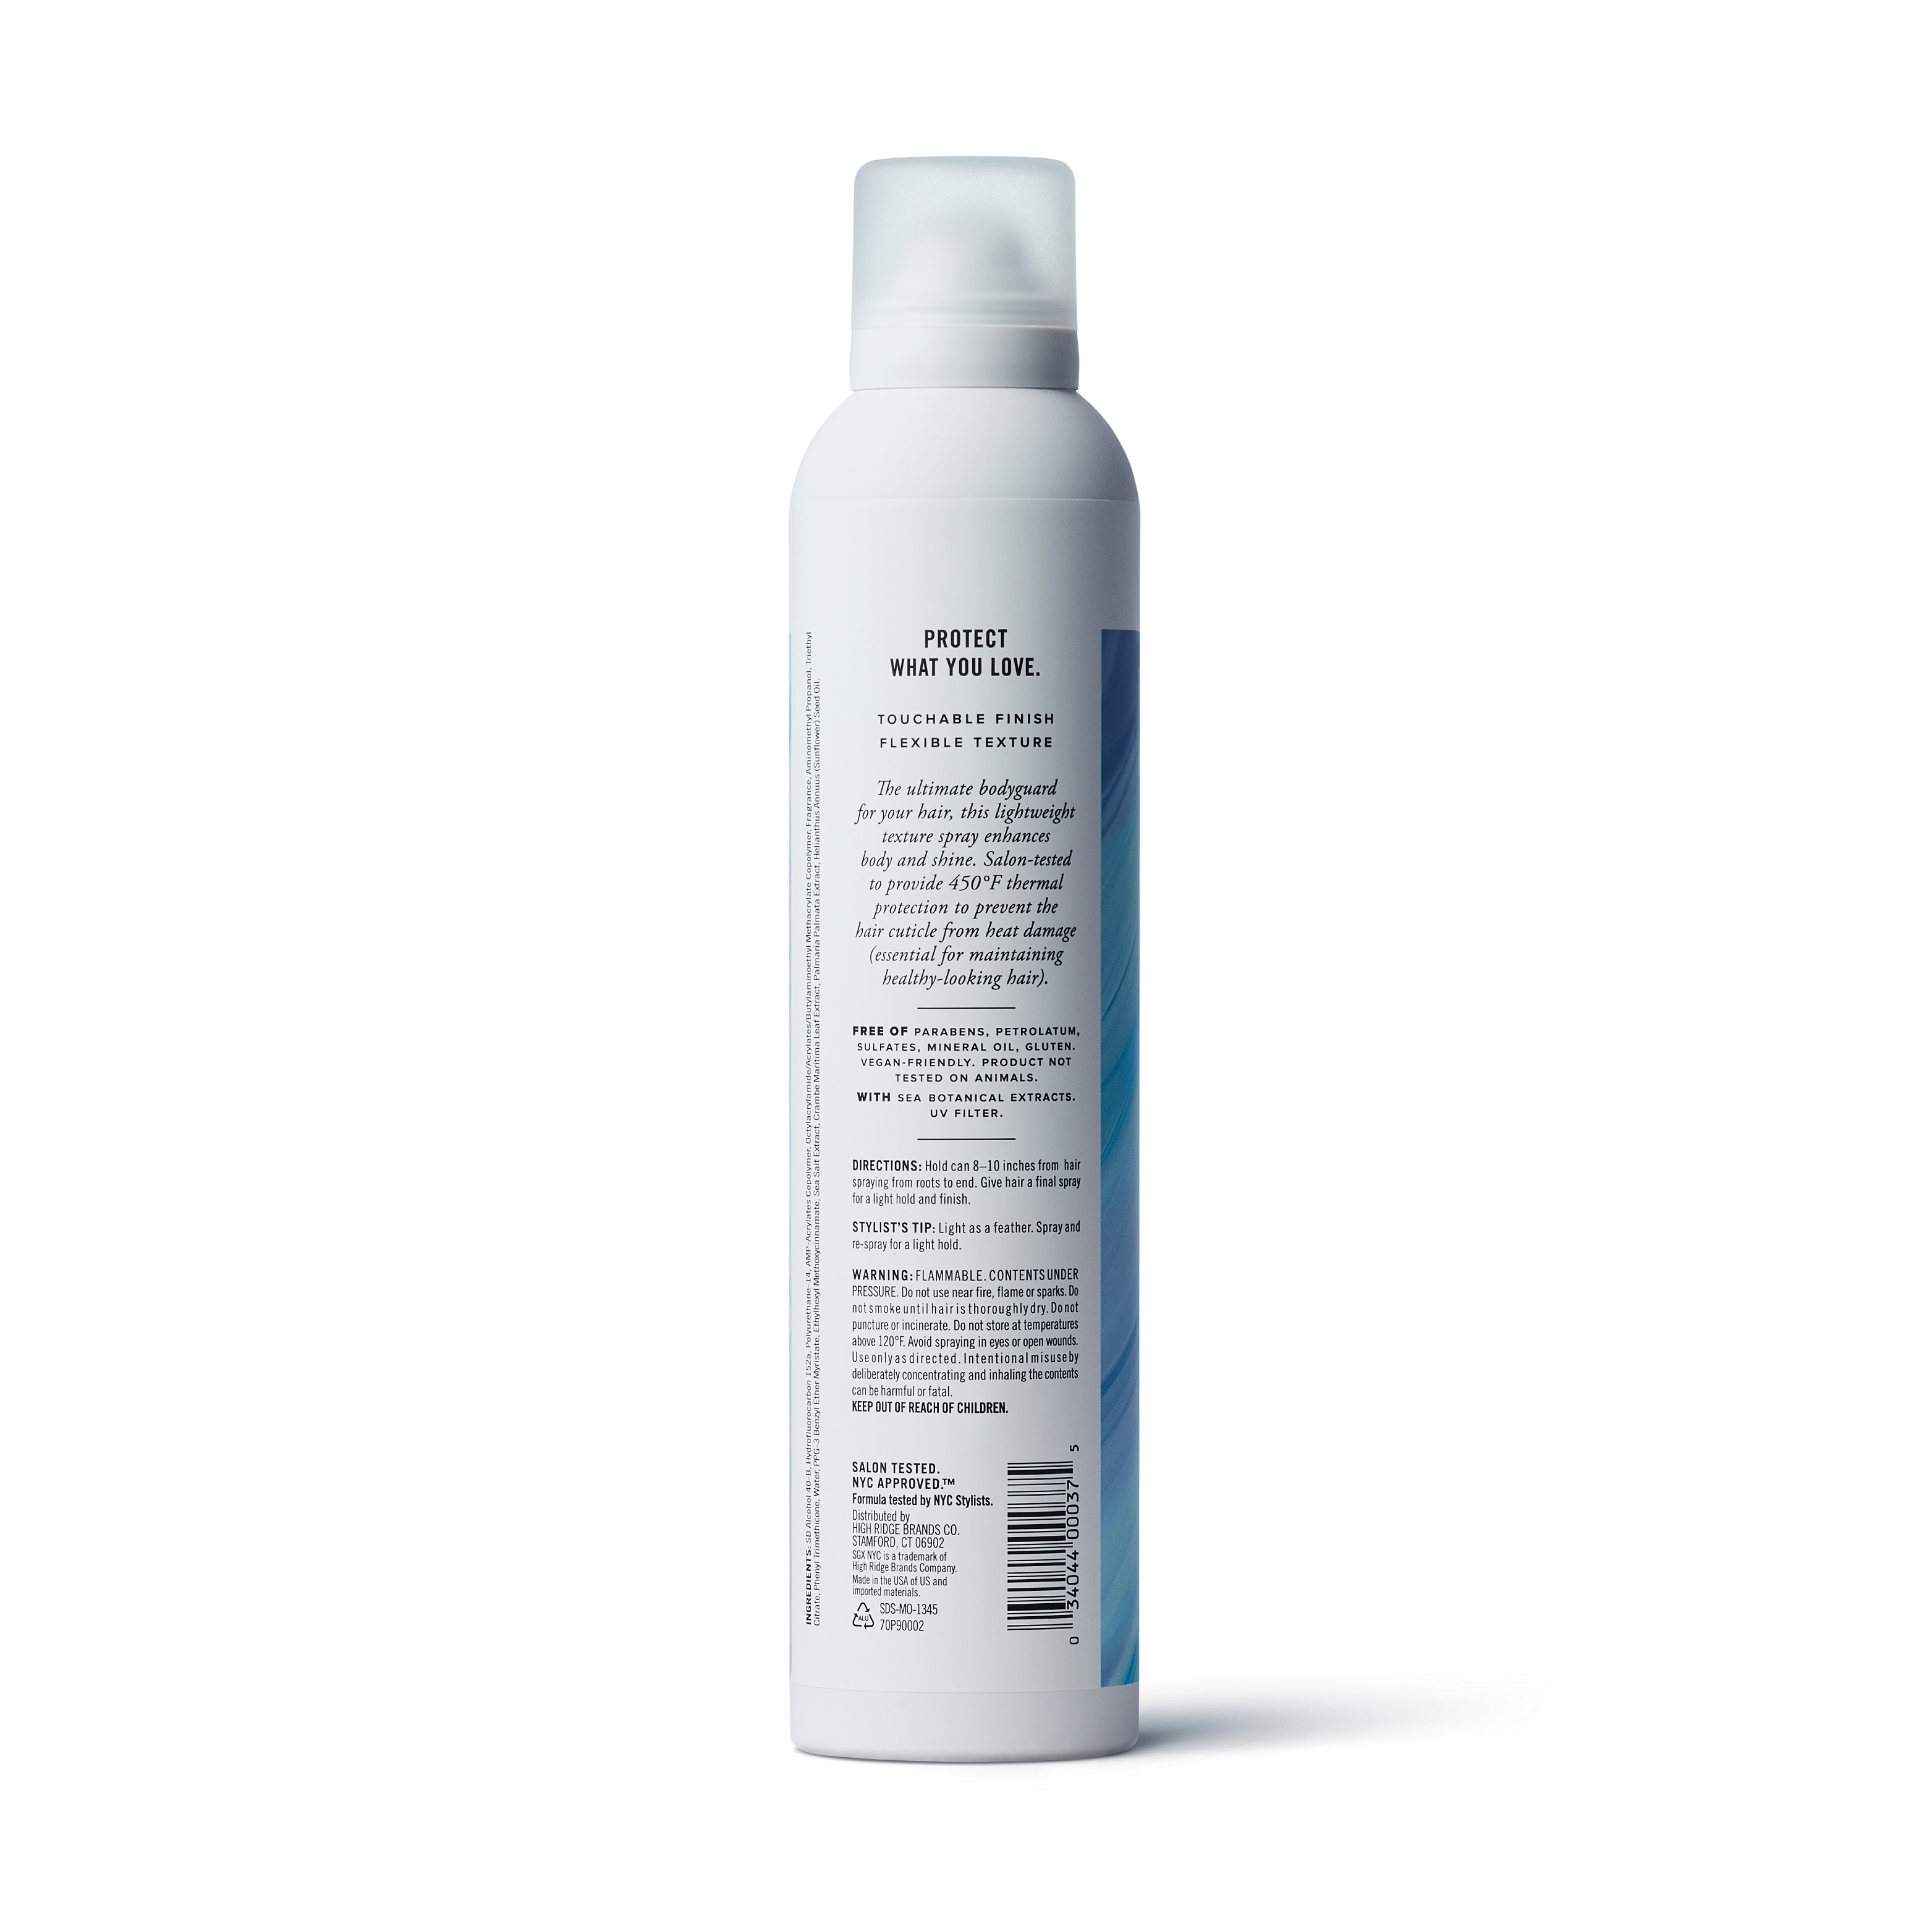 SGX NYC™, The Bodyguard, 450F Thermal Protective Texture Spray, 7.0oz - image 5 of 7